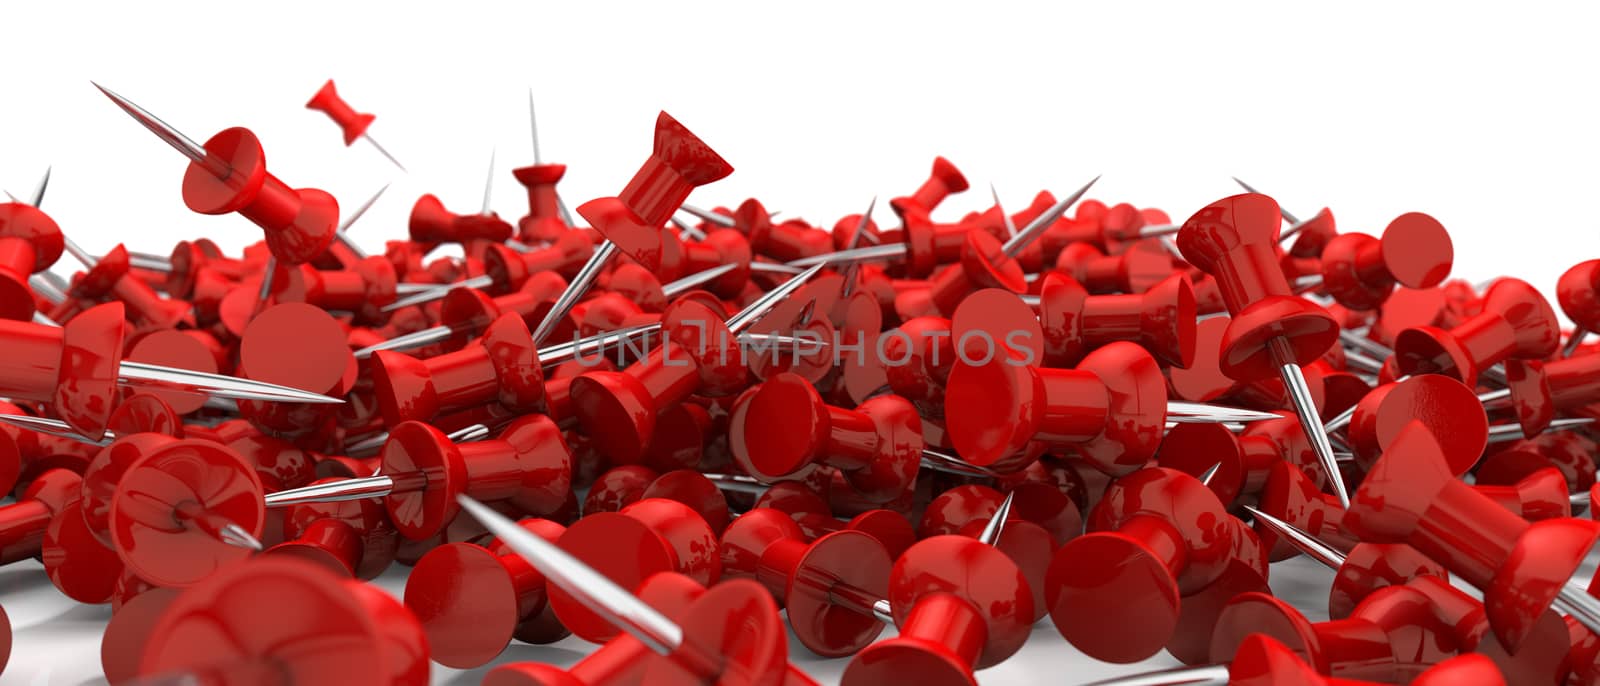 collection of red pushpins or drawing pins scattered on white surface